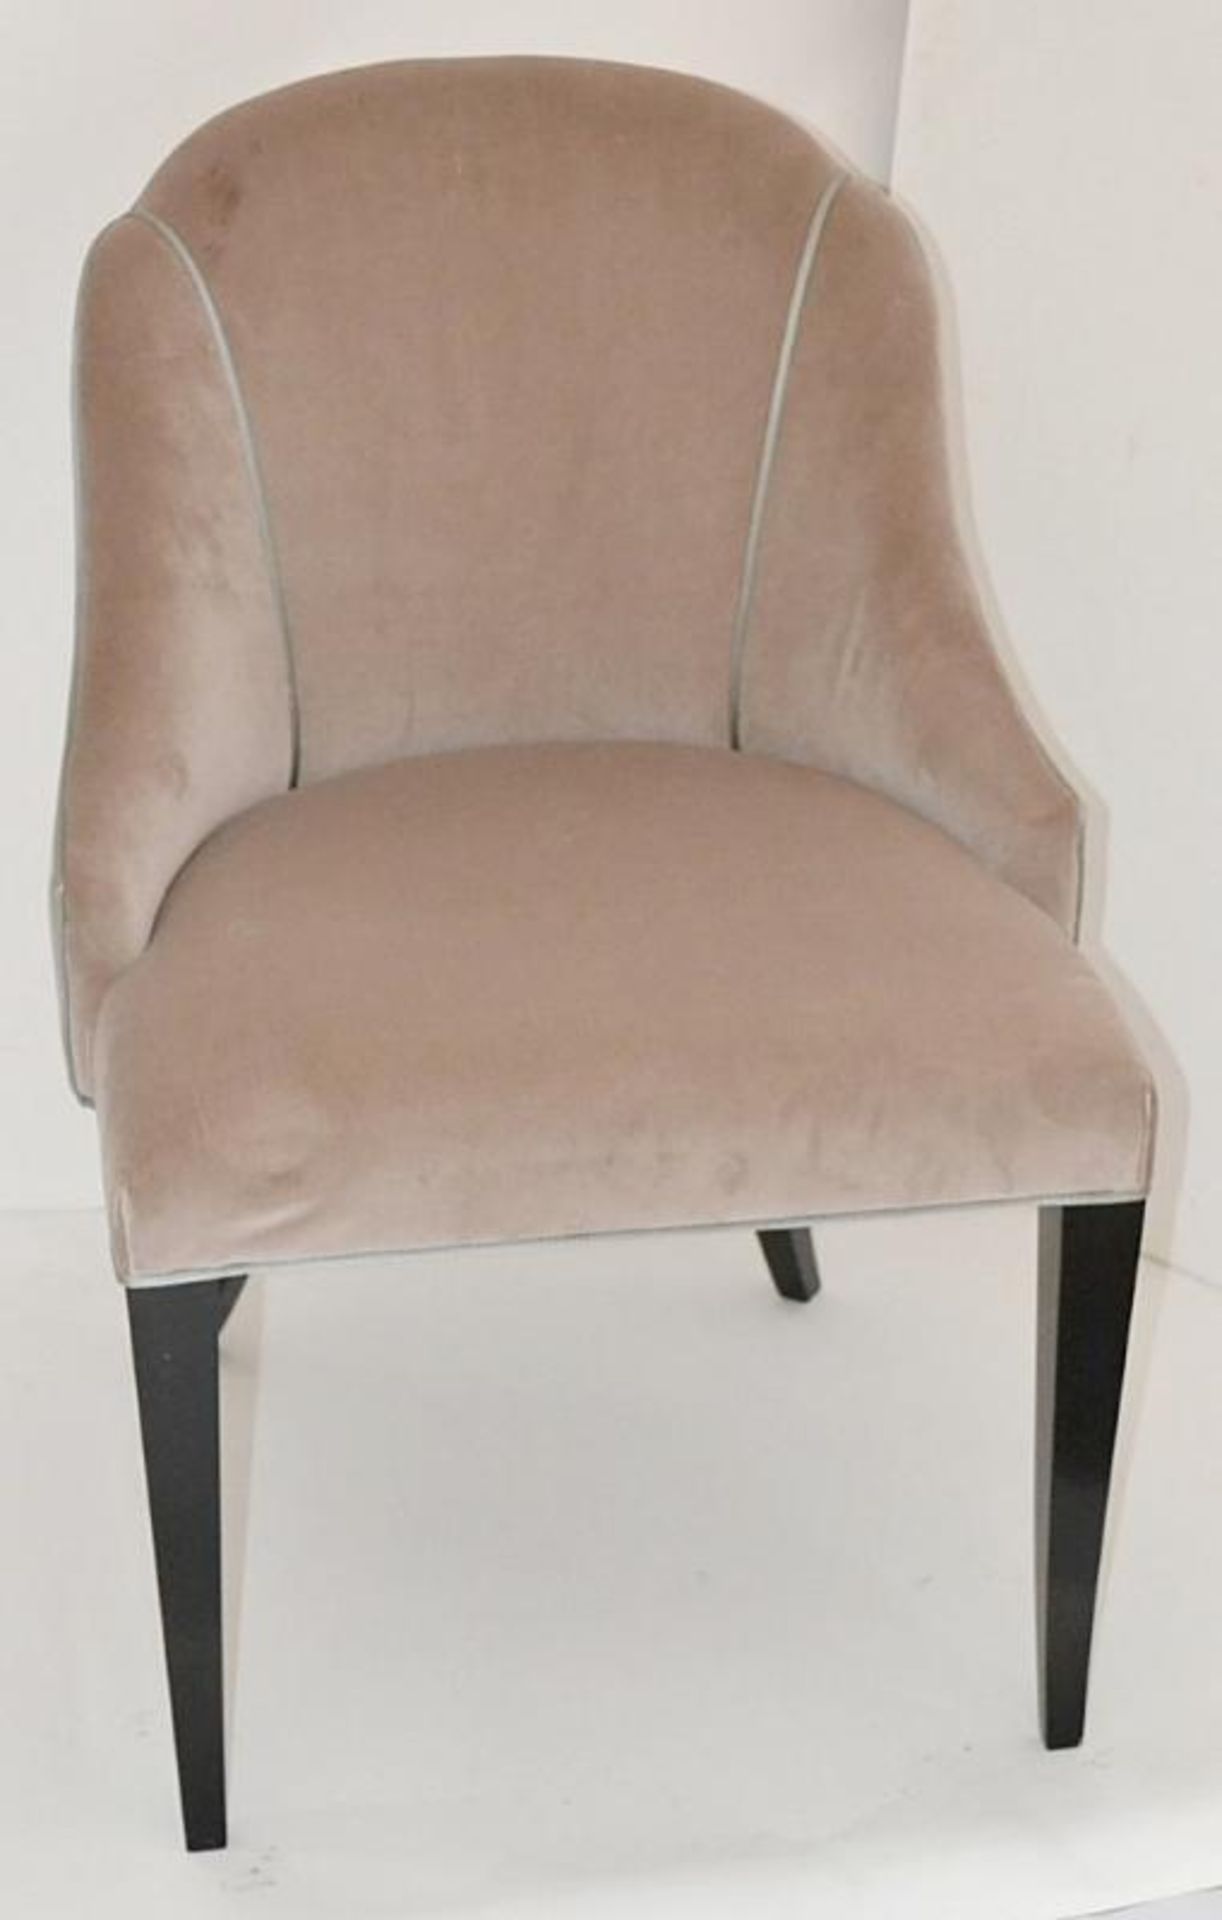 1 x REED &amp; RACKSTRAW "Cloud" Velvet Upholstered Handcrafted Chair - Dimensions: H87 x W58 x D5 - Image 11 of 12